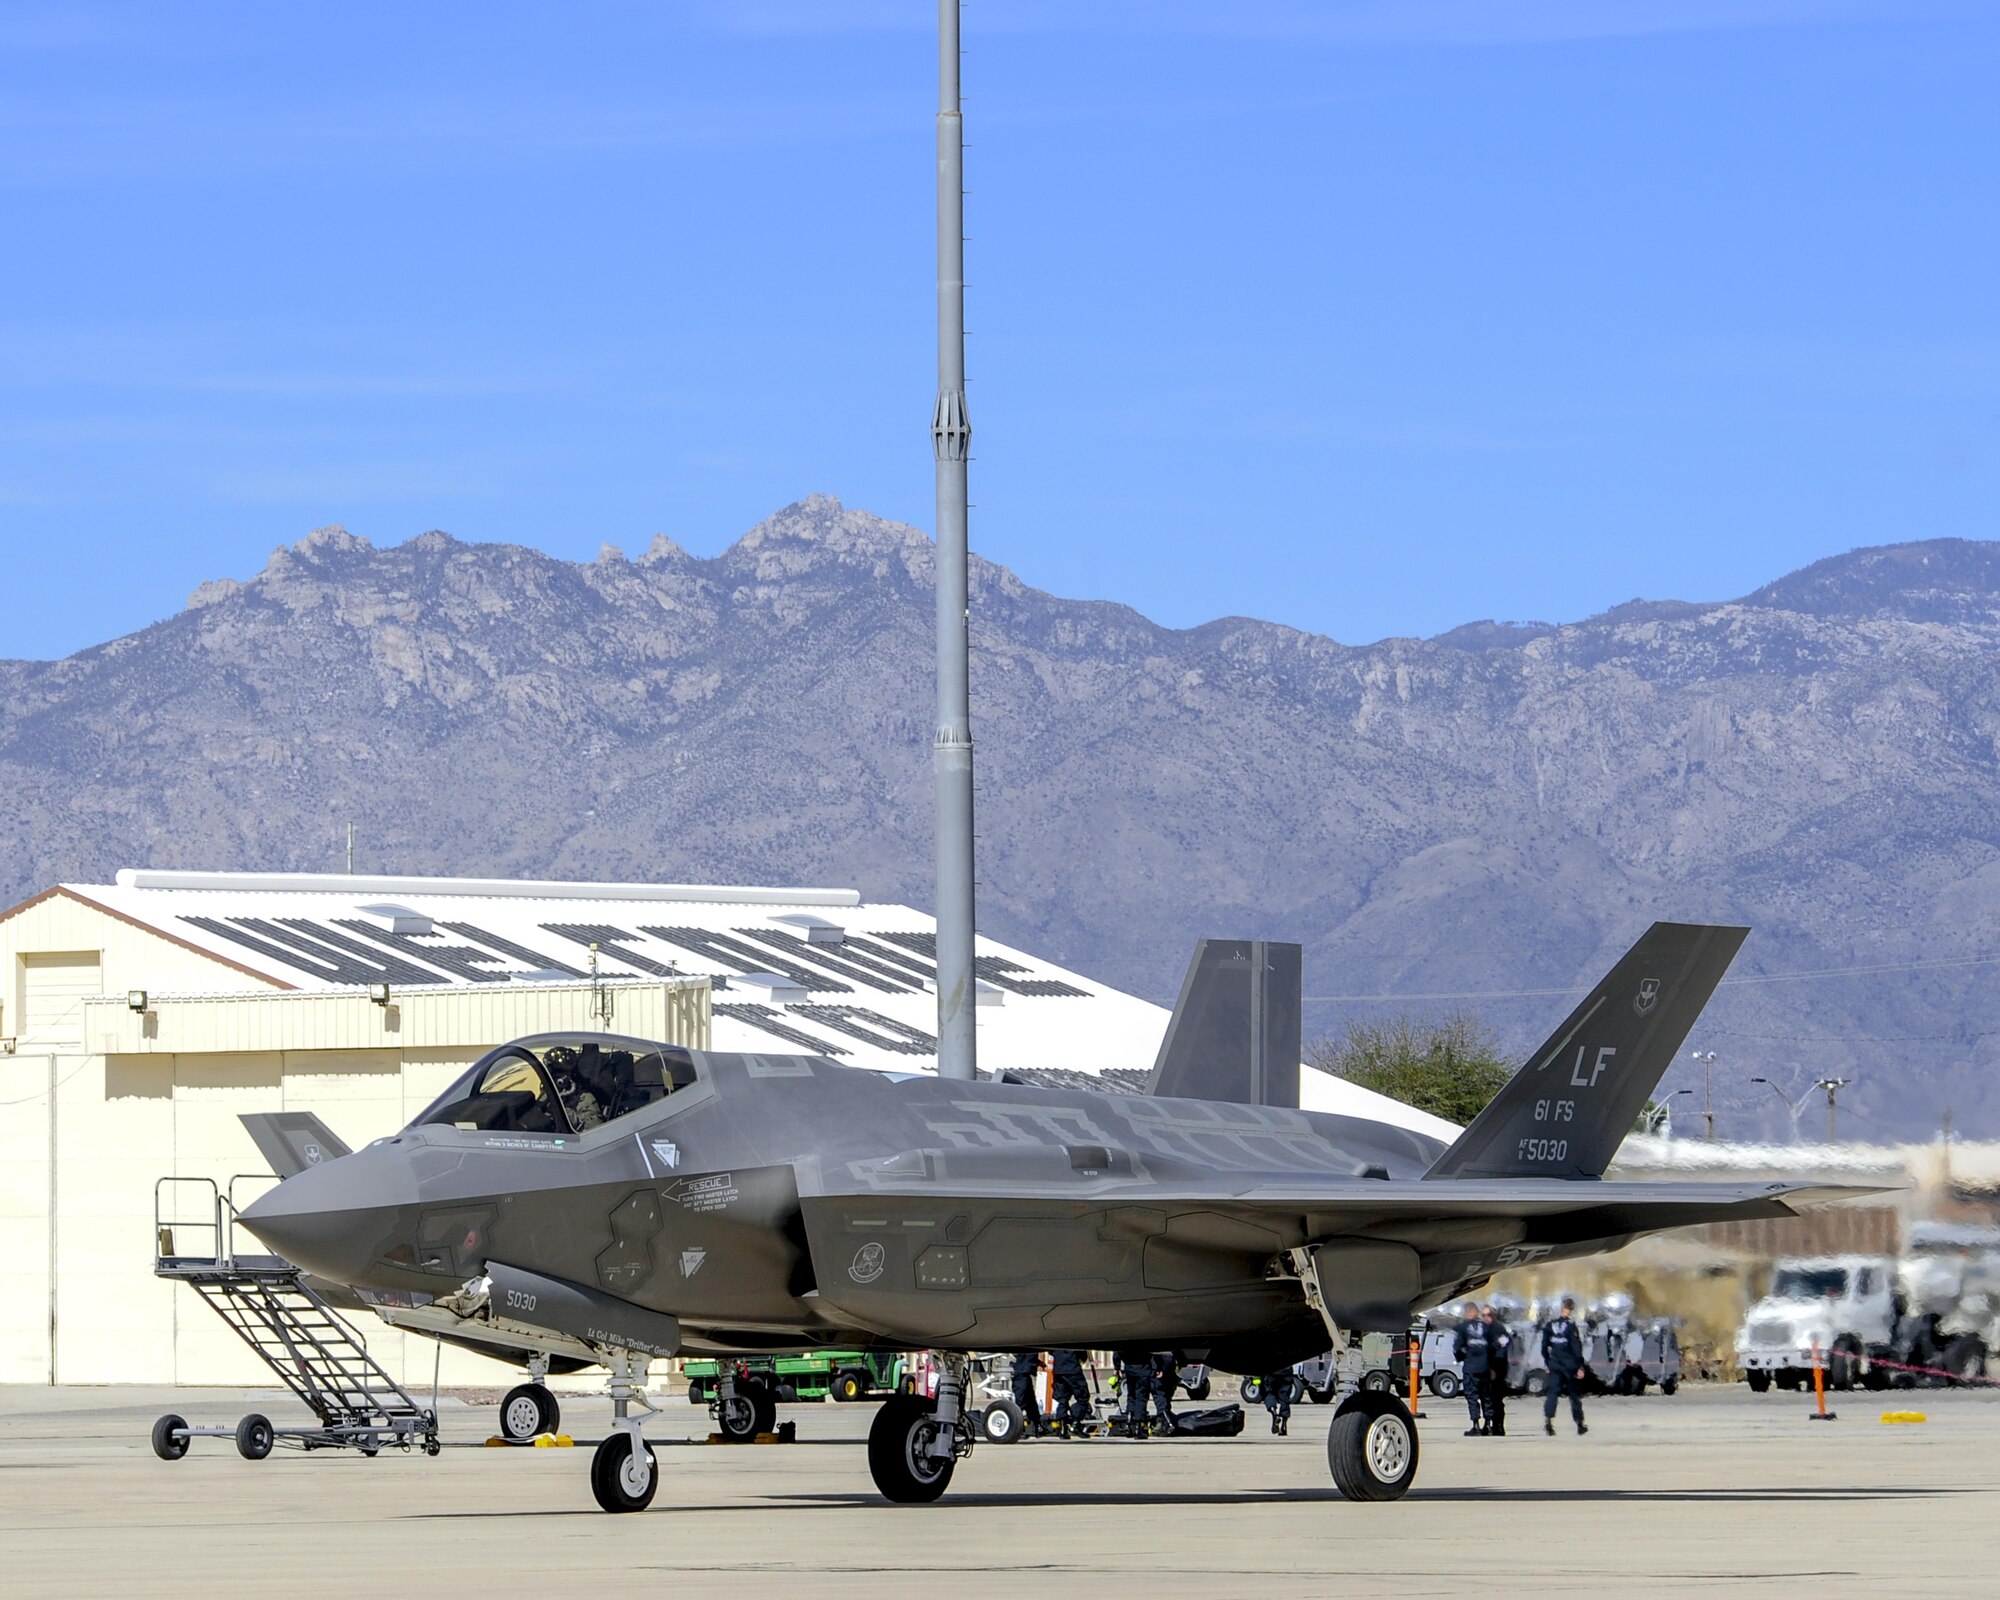 A U.S. Air Force F-35 Lightning II taxis down the flightline during the 2016 Heritage Flight Training and Certification Course at Davis-Monthan Air Force Base, Ariz., March 4, 2016. Established in 1997, the HFTCC certifies civilian pilots of historic military aircraft and U.S. Air Force pilots to fly in formation together during the upcoming air show season. (U.S. Air Force photo by Senior Airman Chris Massey/Released)